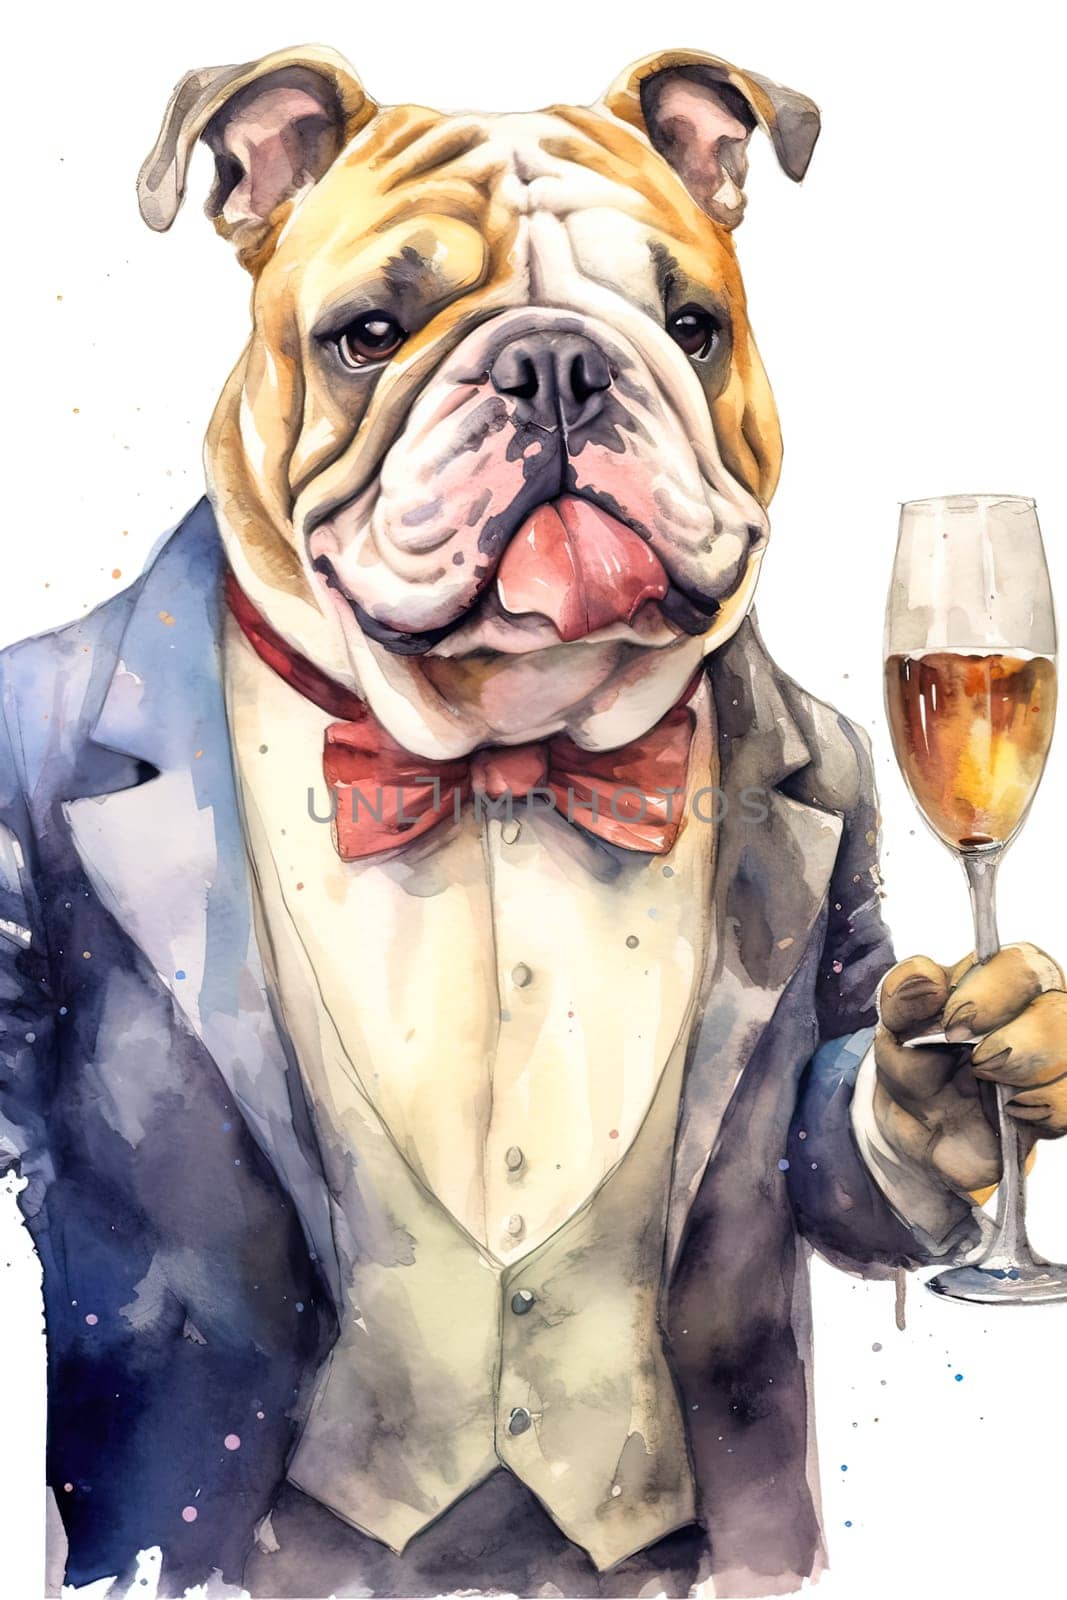 Capture the spirit of celebration with this delightful watercolor bulldog raising a glass of champagne in a toast on your greeting cards. Cheers